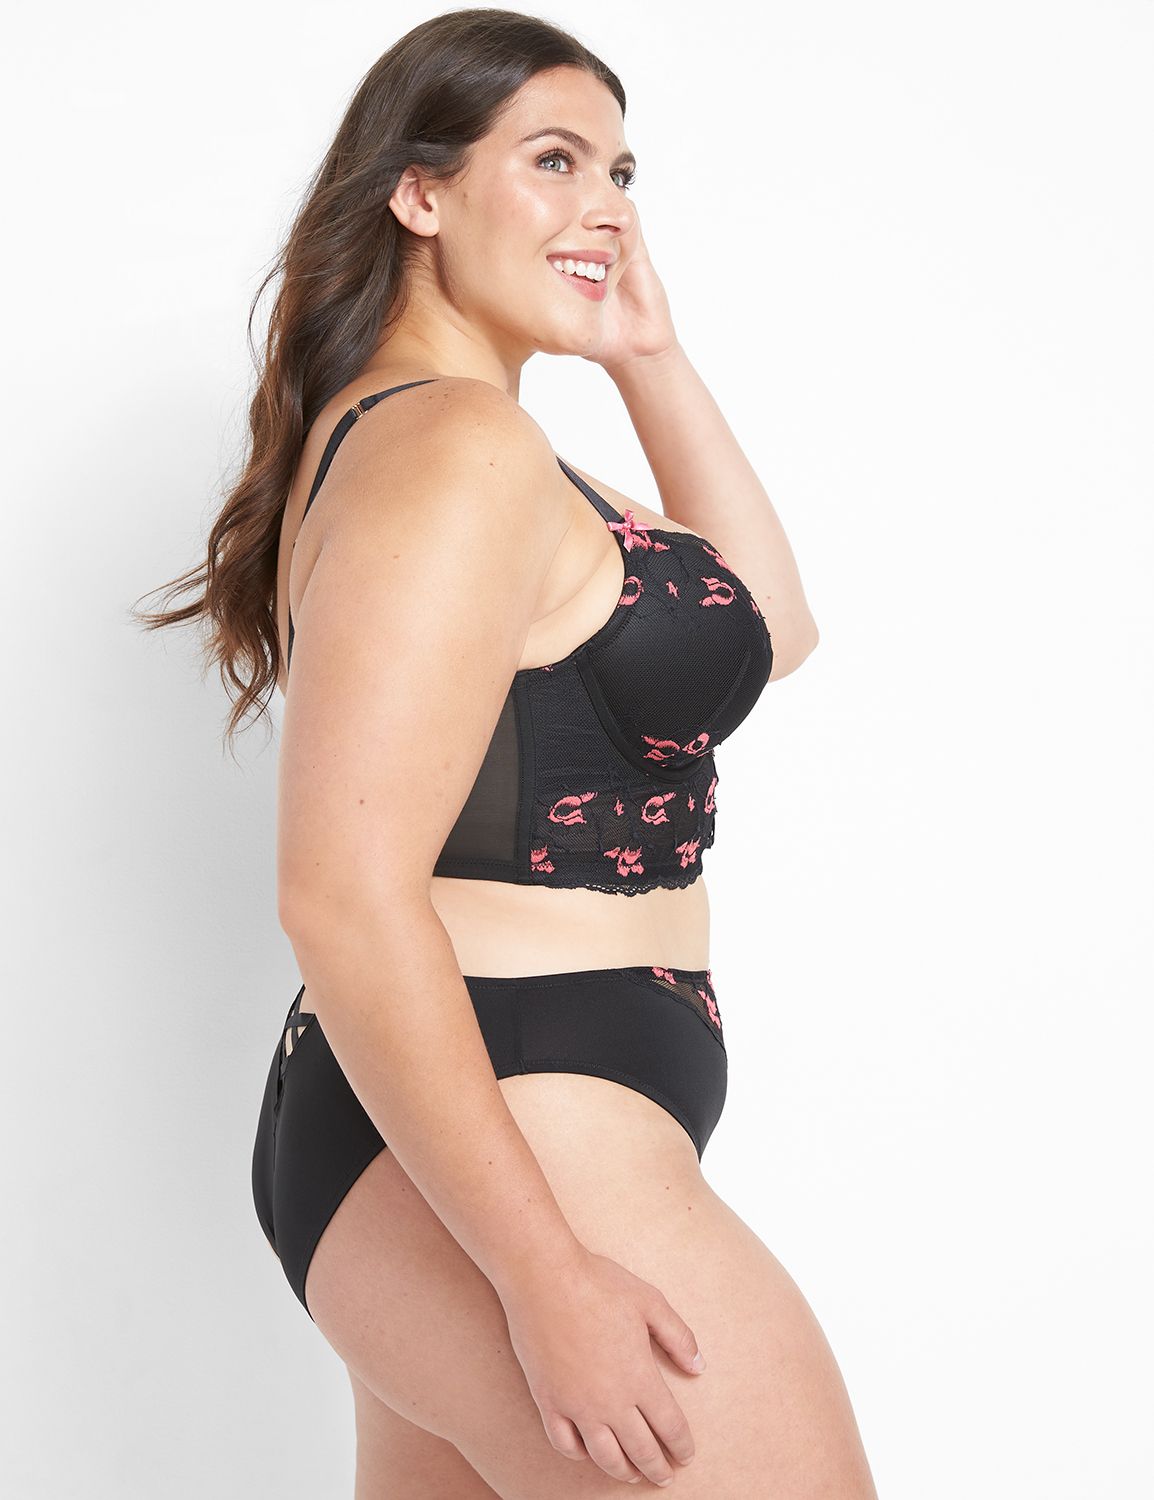 Cacique 38F Bra Black Smooth Balconette Plus Size Lane Bryant Intimates 13  - $23 - From Bailey